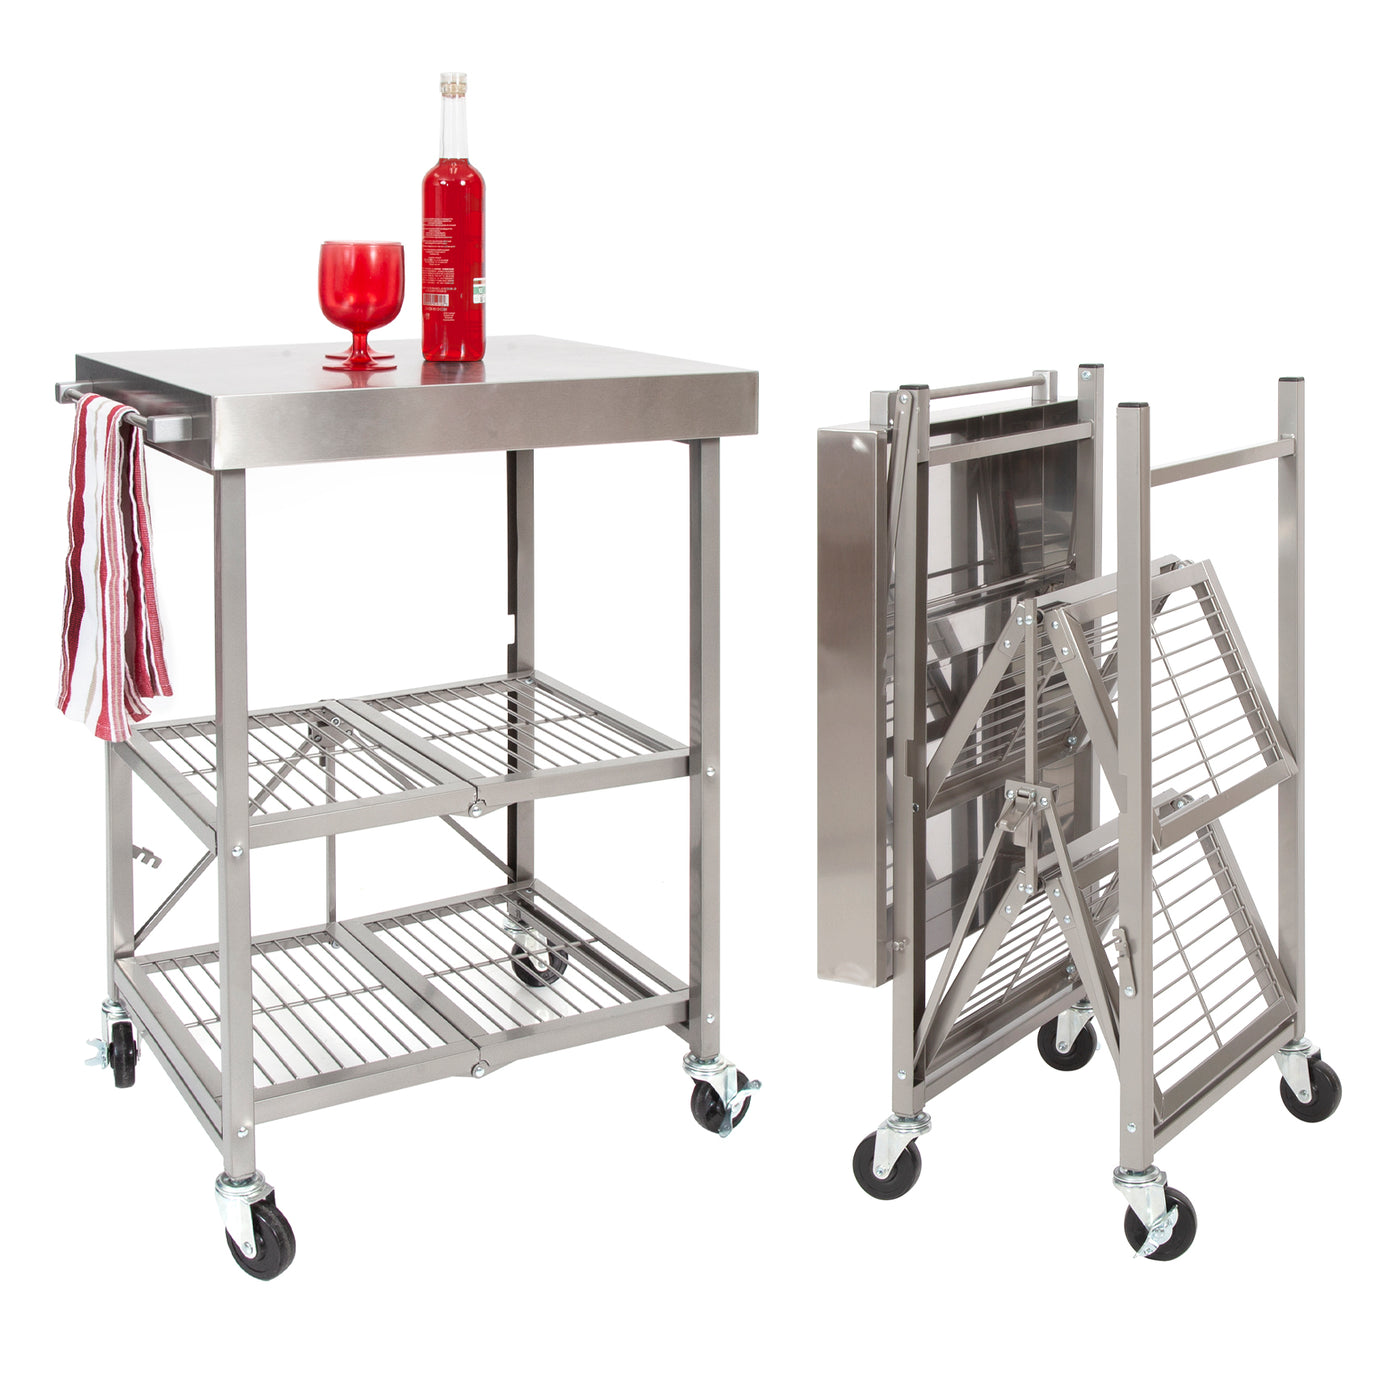 Origami Fully Stainless Steel Foldable Kitchen Island with Wheels